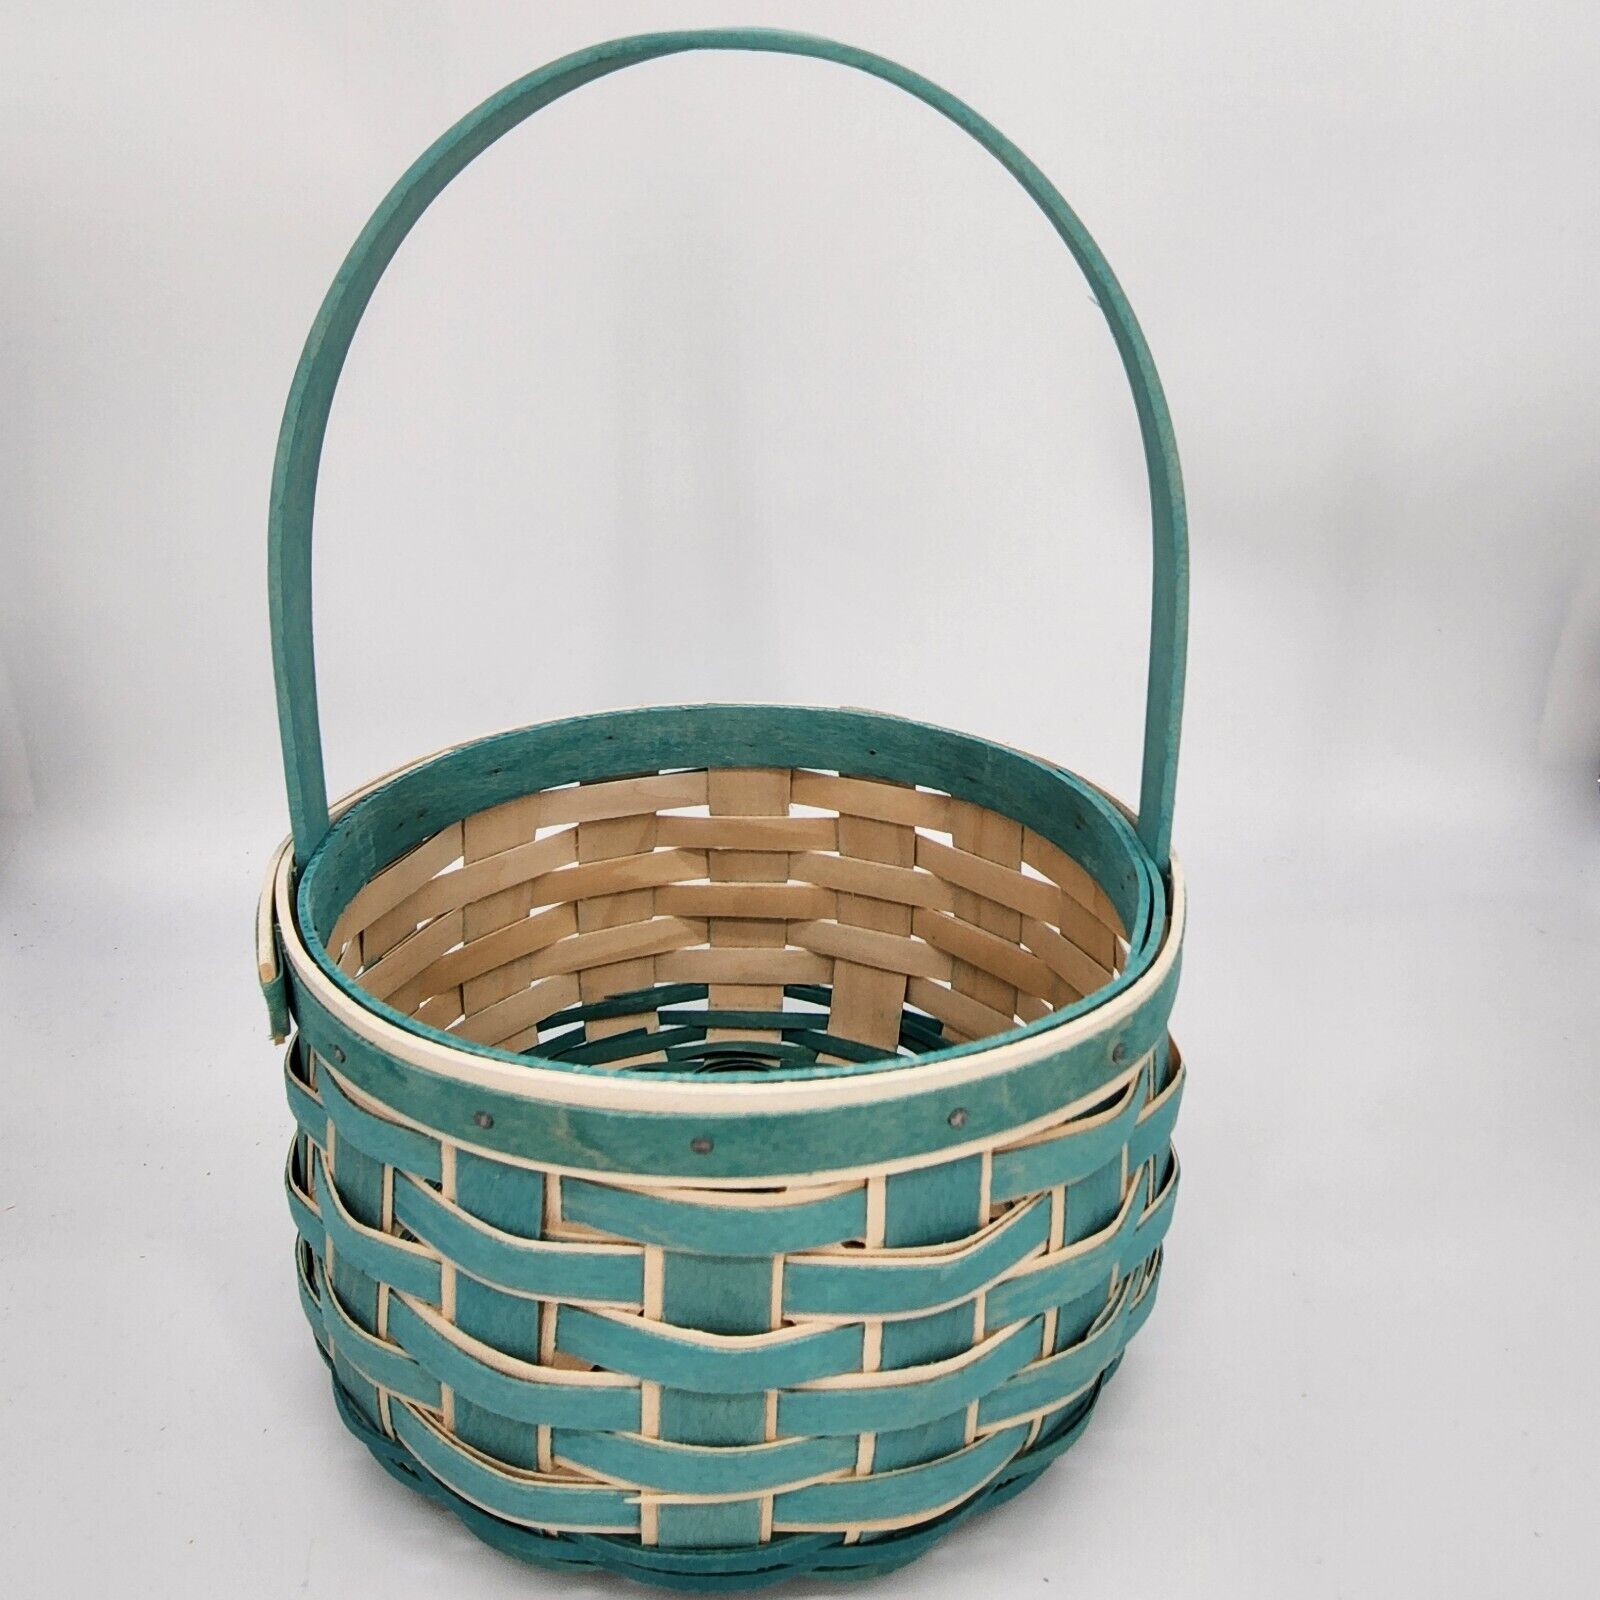 Longaberger 2018 Teal Blue & White Small Woven Round Easter Basket New Old Stock